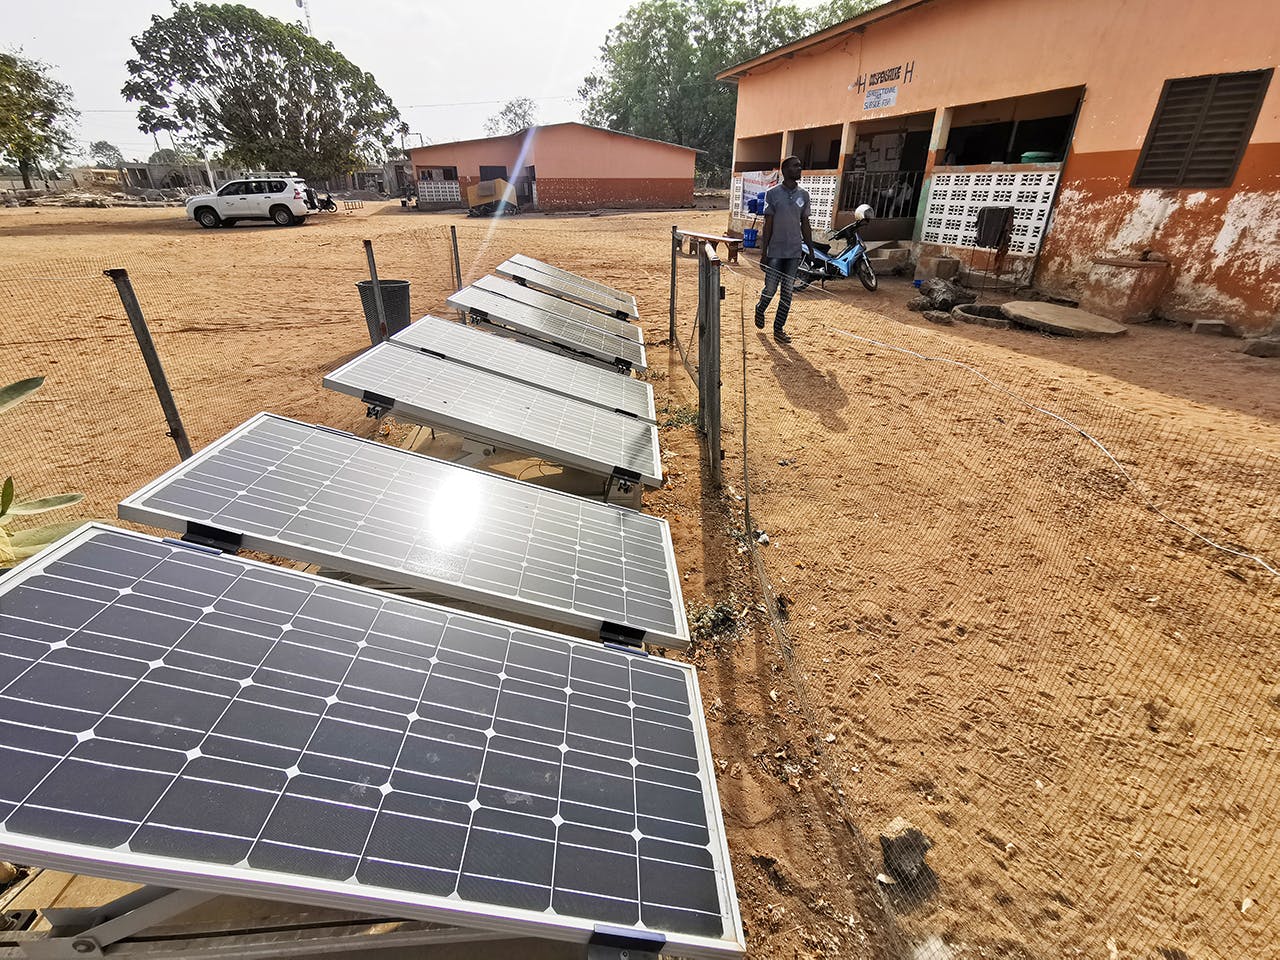 Ministry of Health of Benin - “Solar4Clinics” to calibrate health center systems